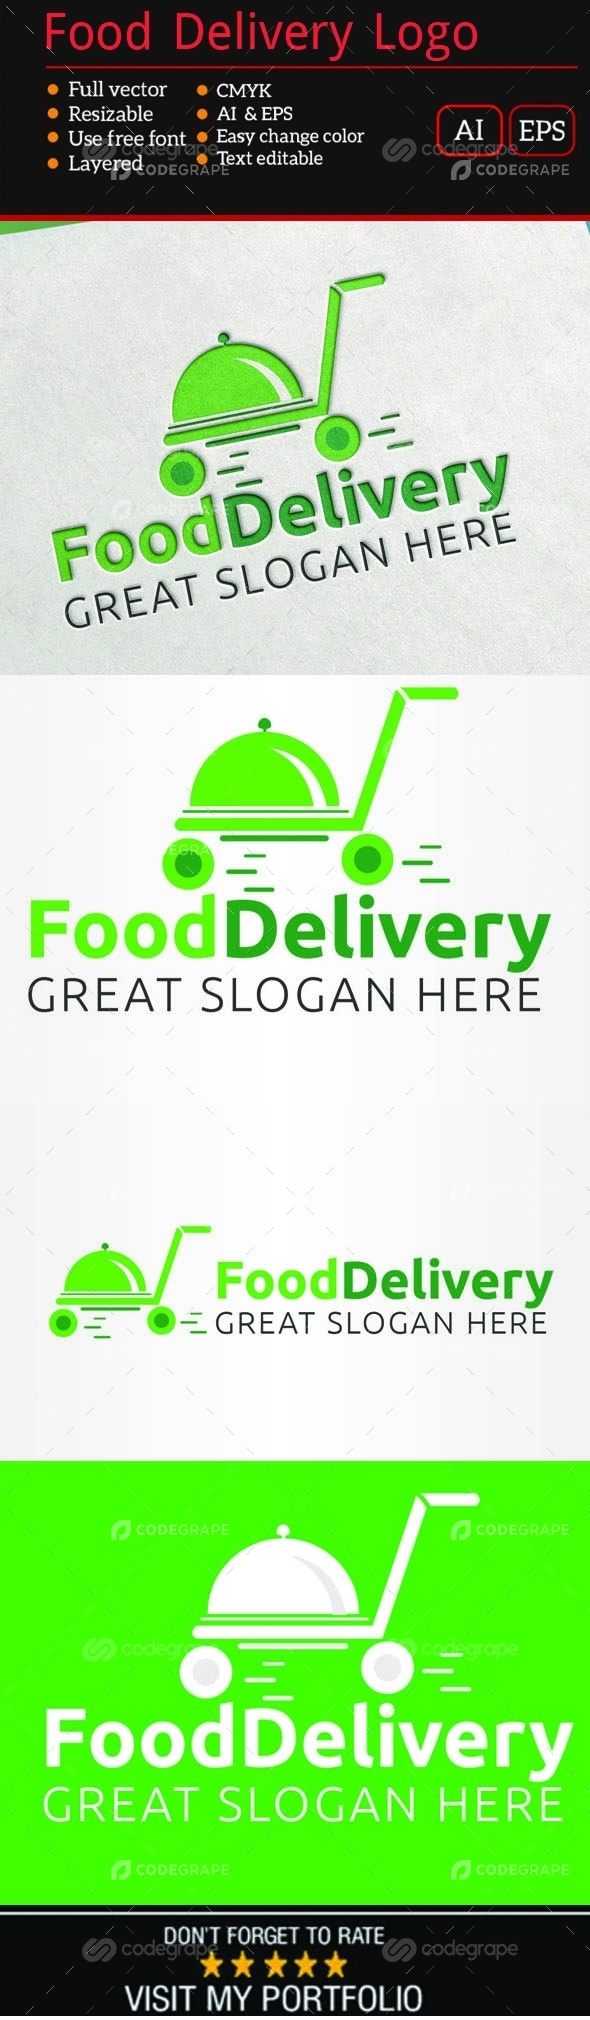 Food Delivery Logo